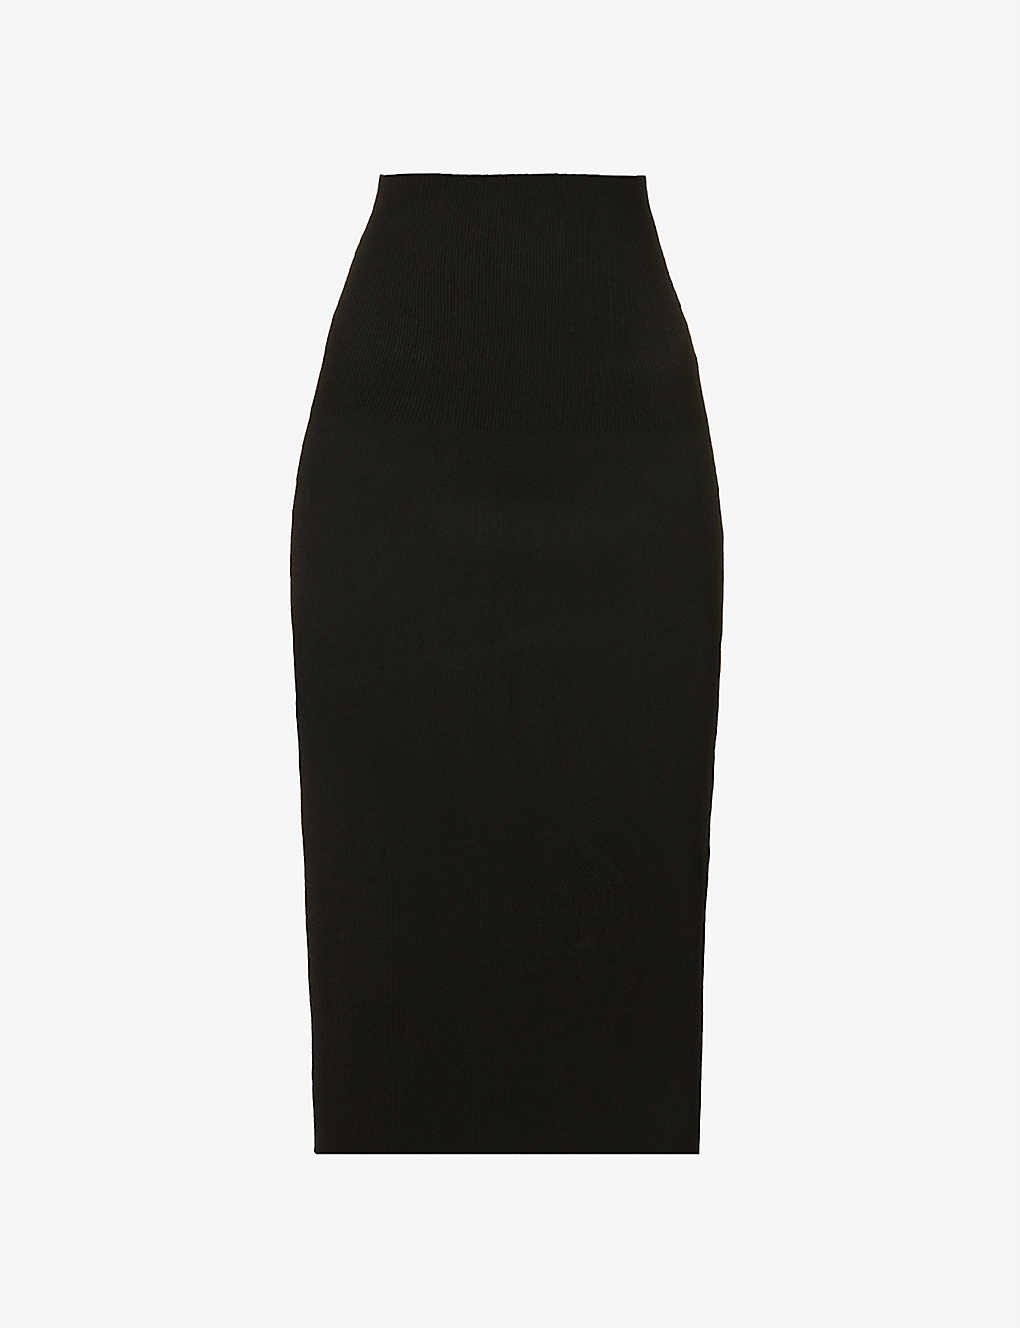 Victoria Beckham Womens Black Fitted Ribbed Stretch-woven Midi Skirt